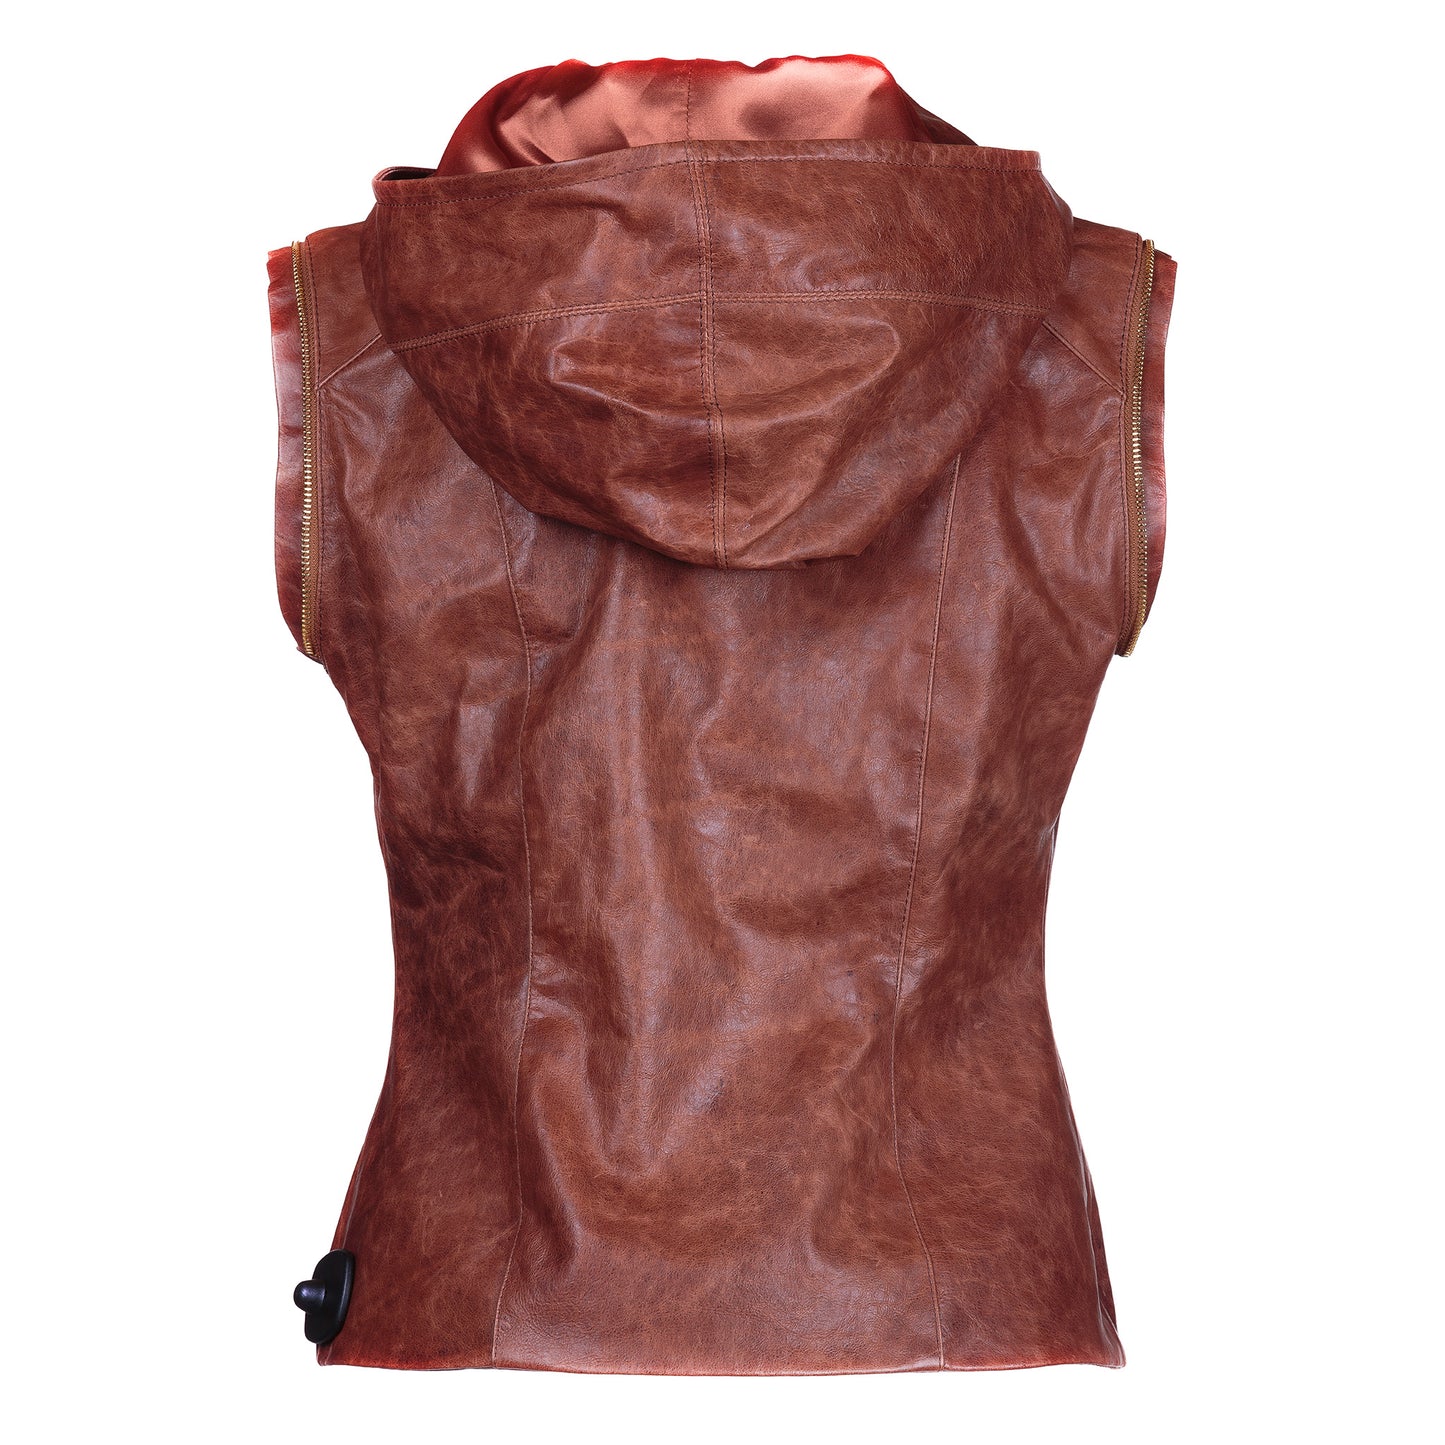 Removable Sleeves and Hood Reindeer Leather Jacket- Limited Edition